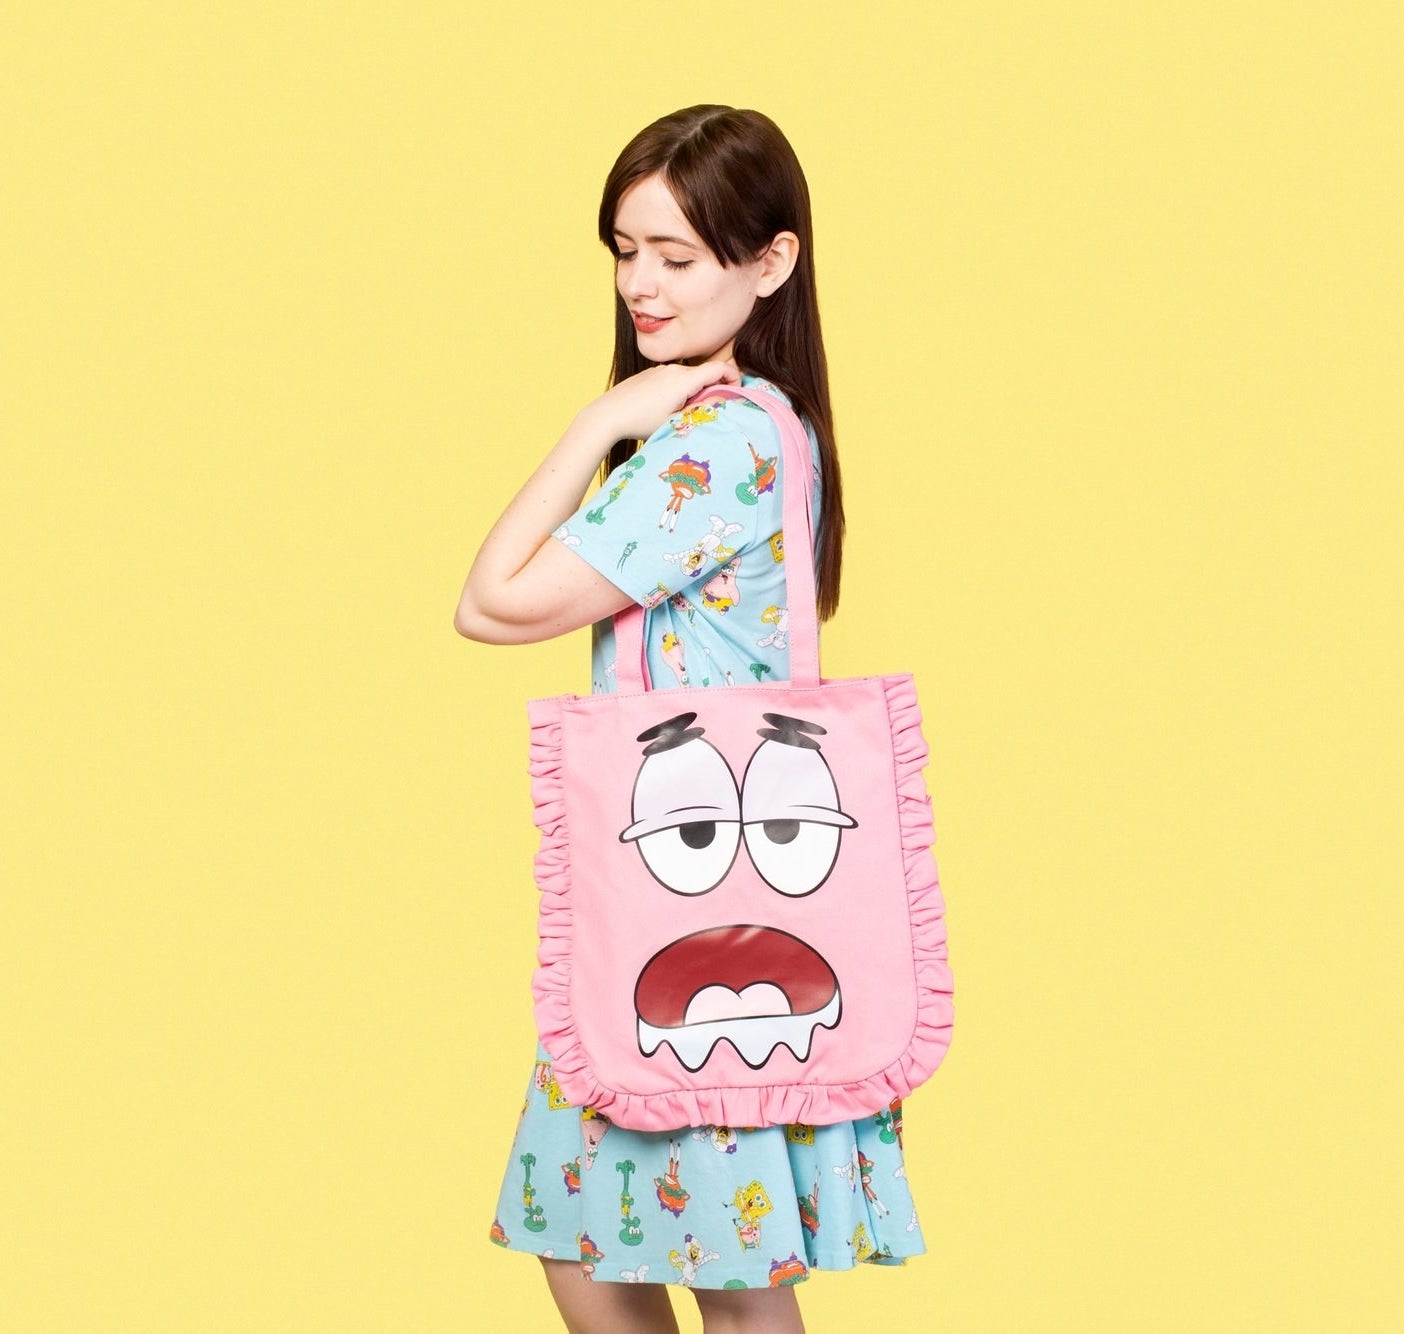 A model carrying the pink tote with ruffles around the sides and the drooling face of Patrick Star from &quot;SpongeBob&quot; emblazoned on it